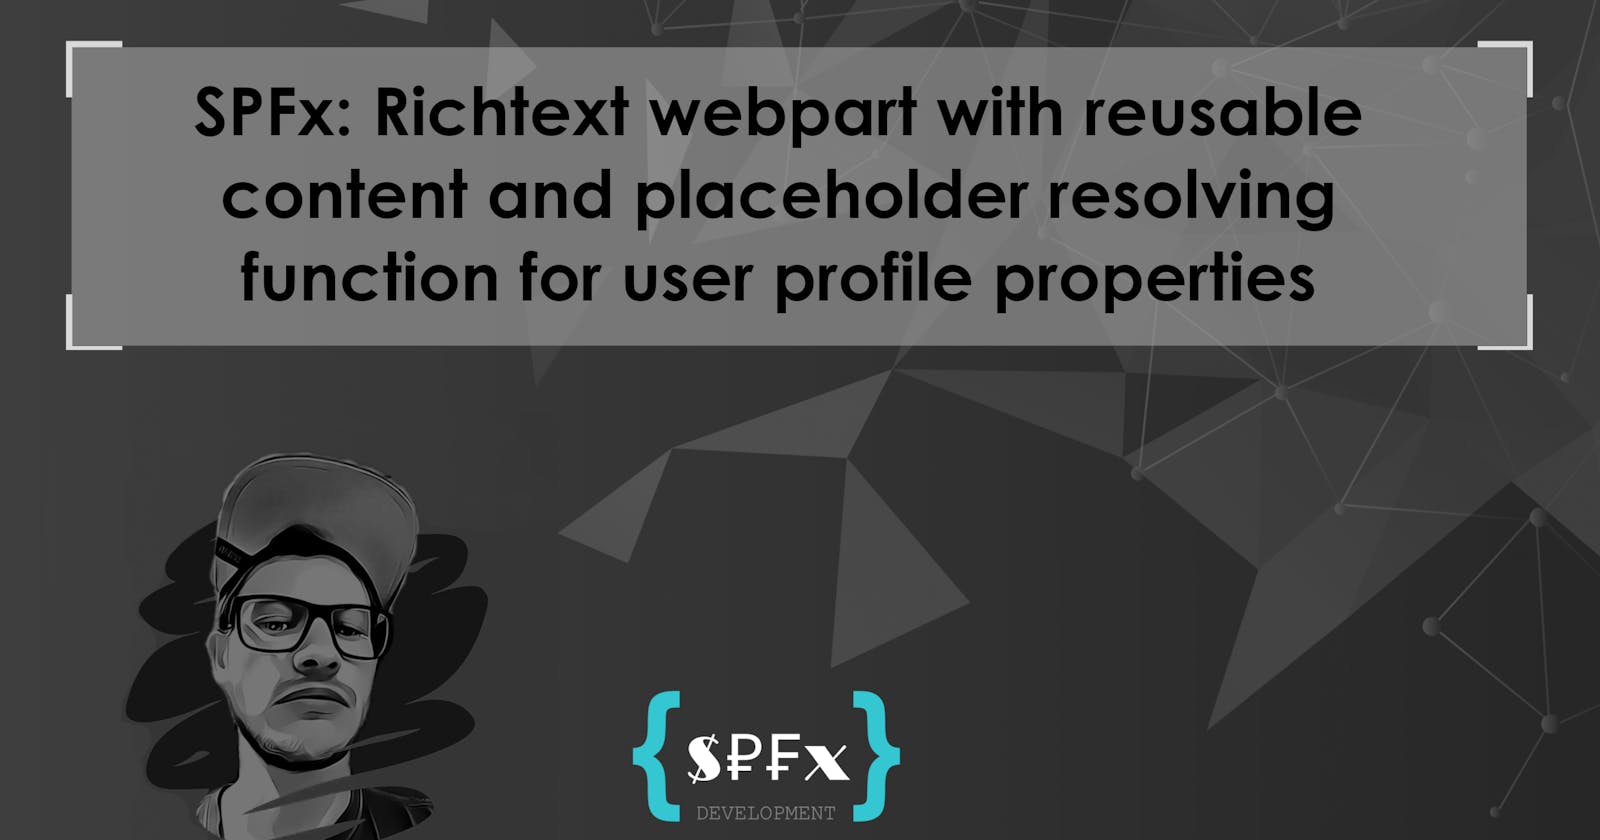 SPFx: Richtext webpart with reusable content and placeholder resolving function for user profile properties